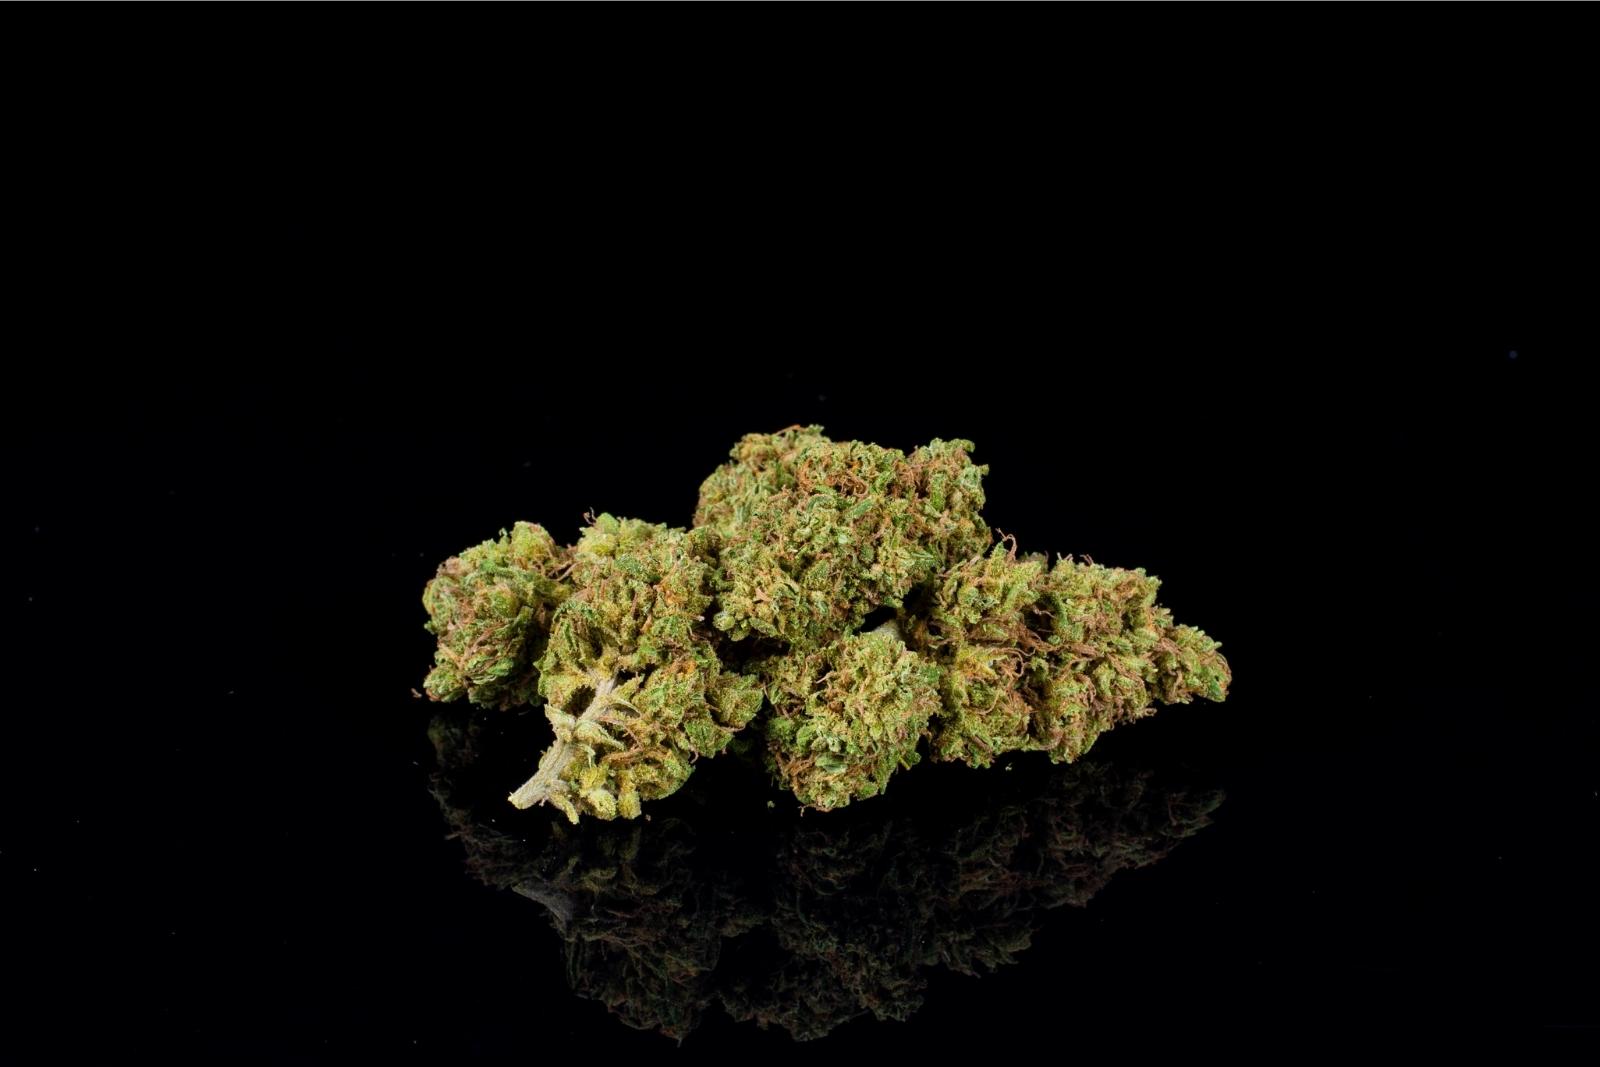 A pile of nugs of Cherry Crème Brulee hemp flower by Holy City Farms, on a black background